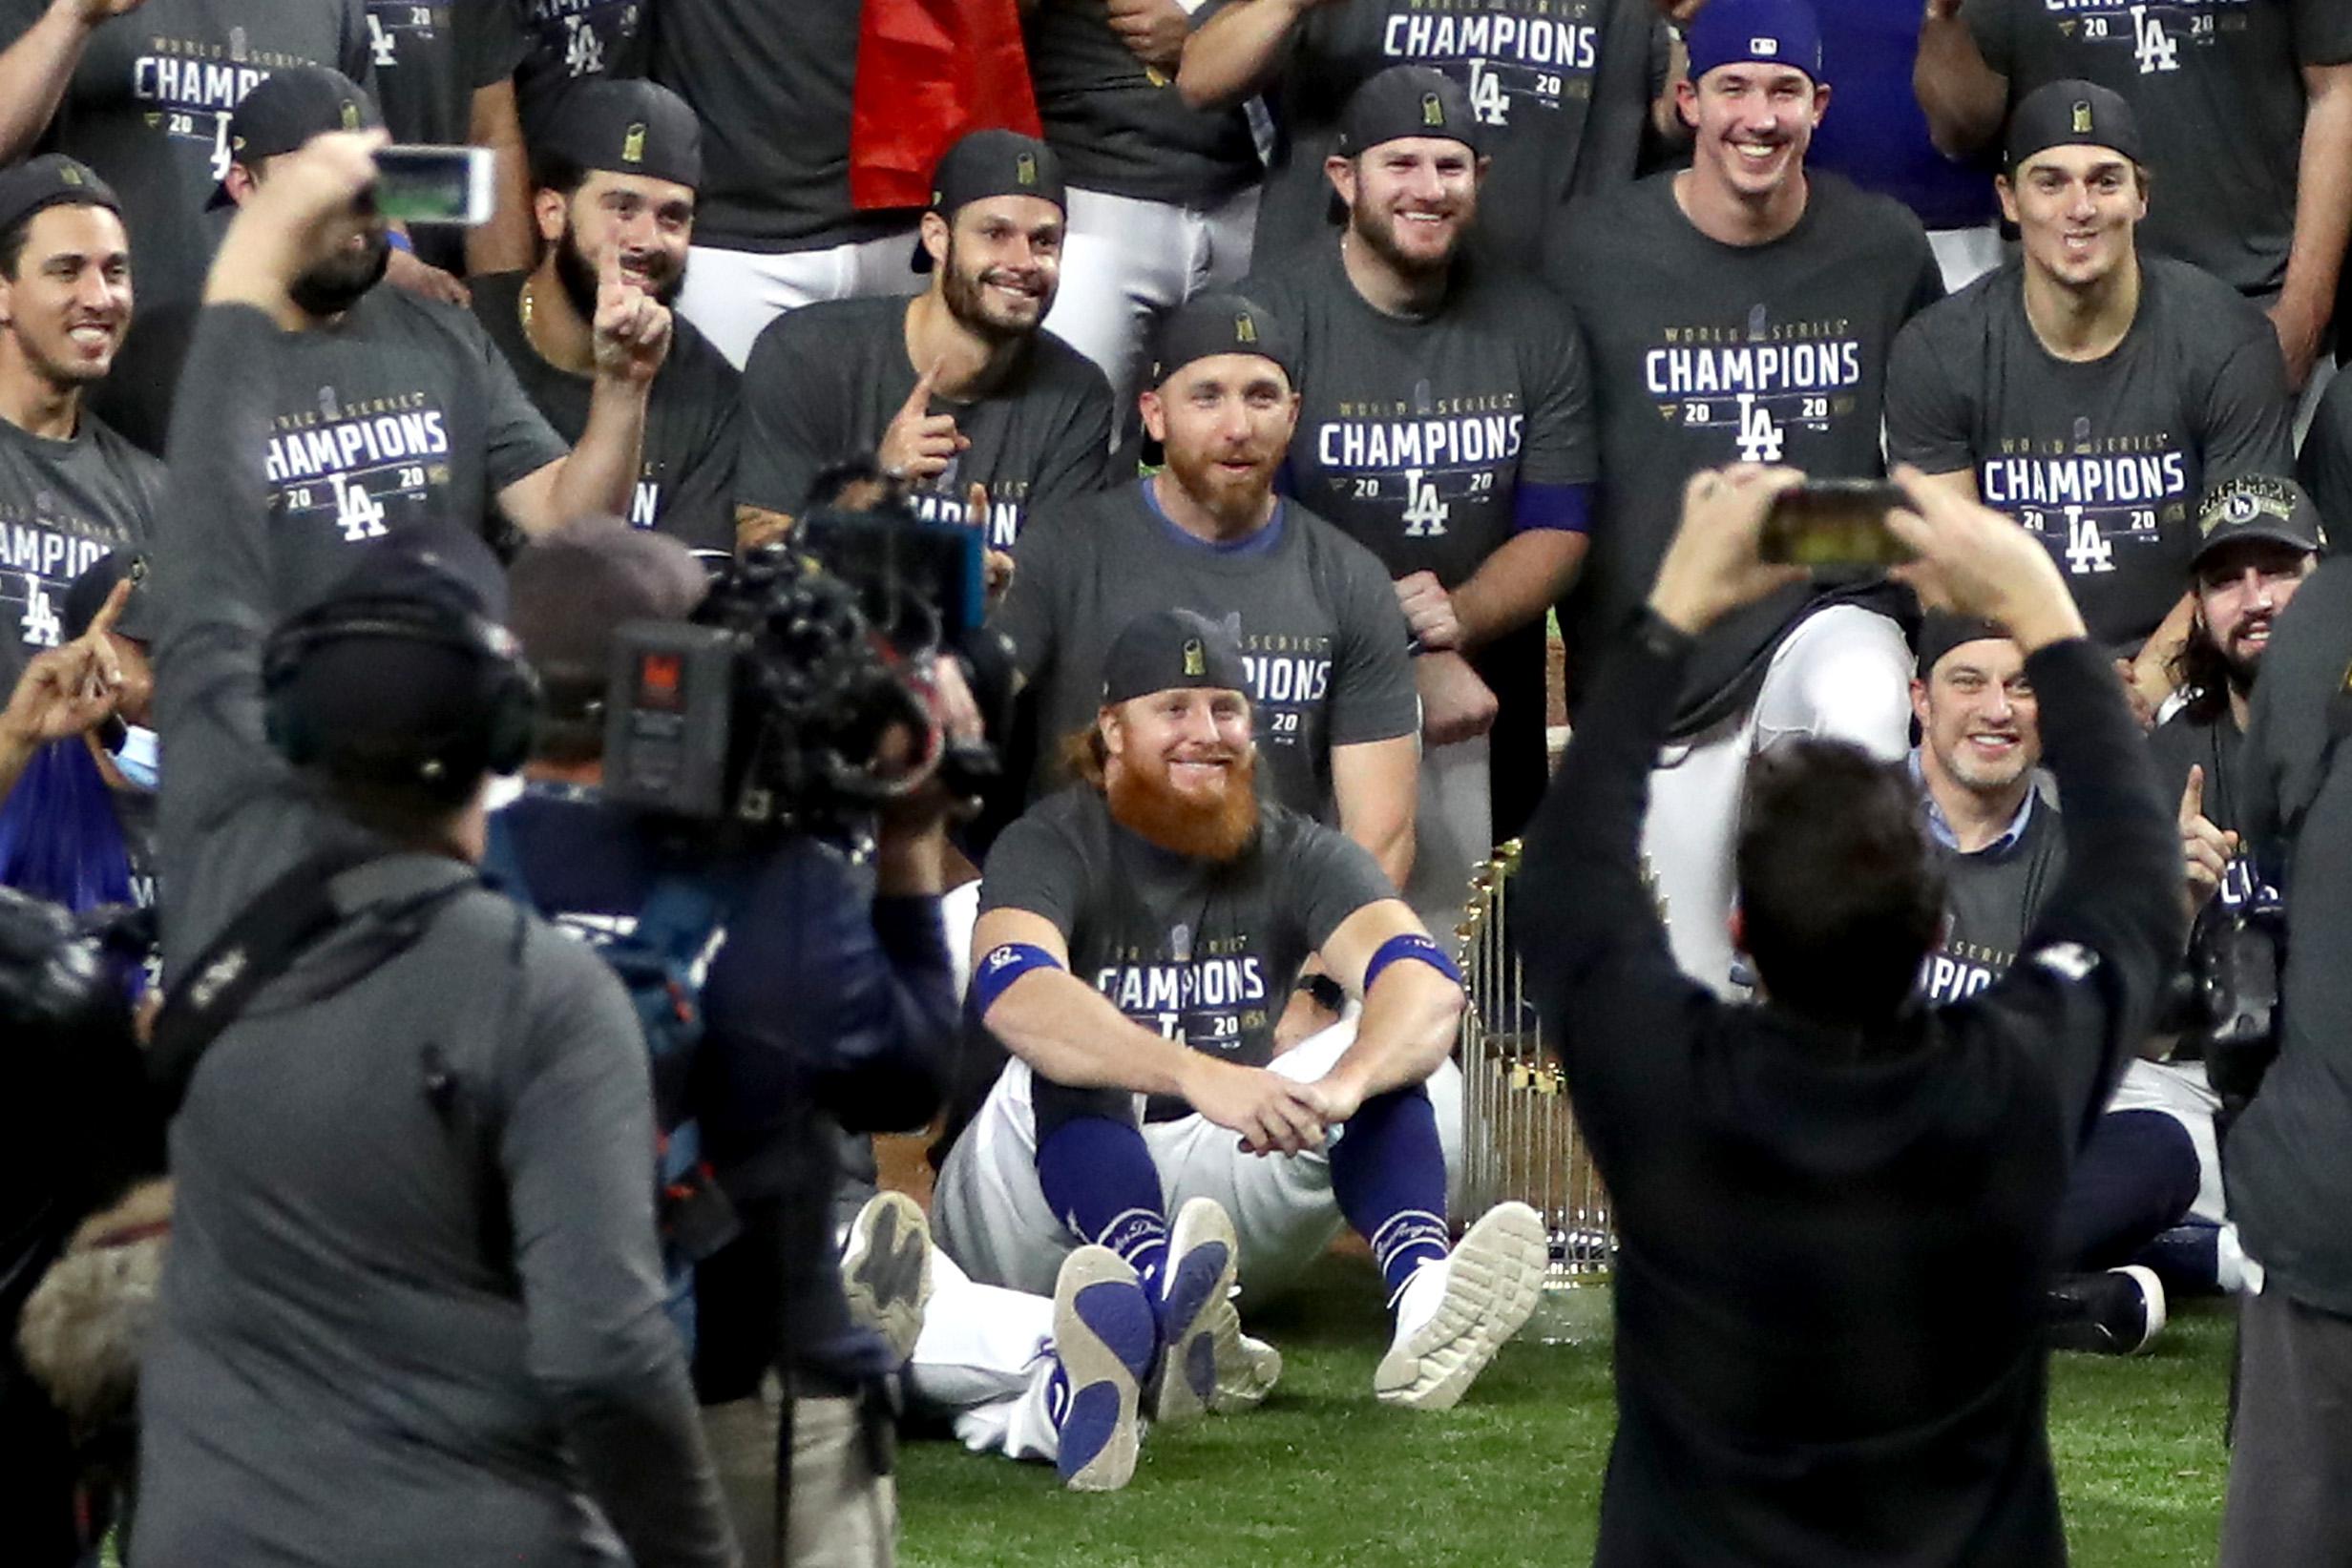  Justin Turner #10 and the Los Angeles Dodgers pose for a photo after defeating the Tampa Bay Rays 3-1 in Game 6 to win the 2020 MLB World Series.